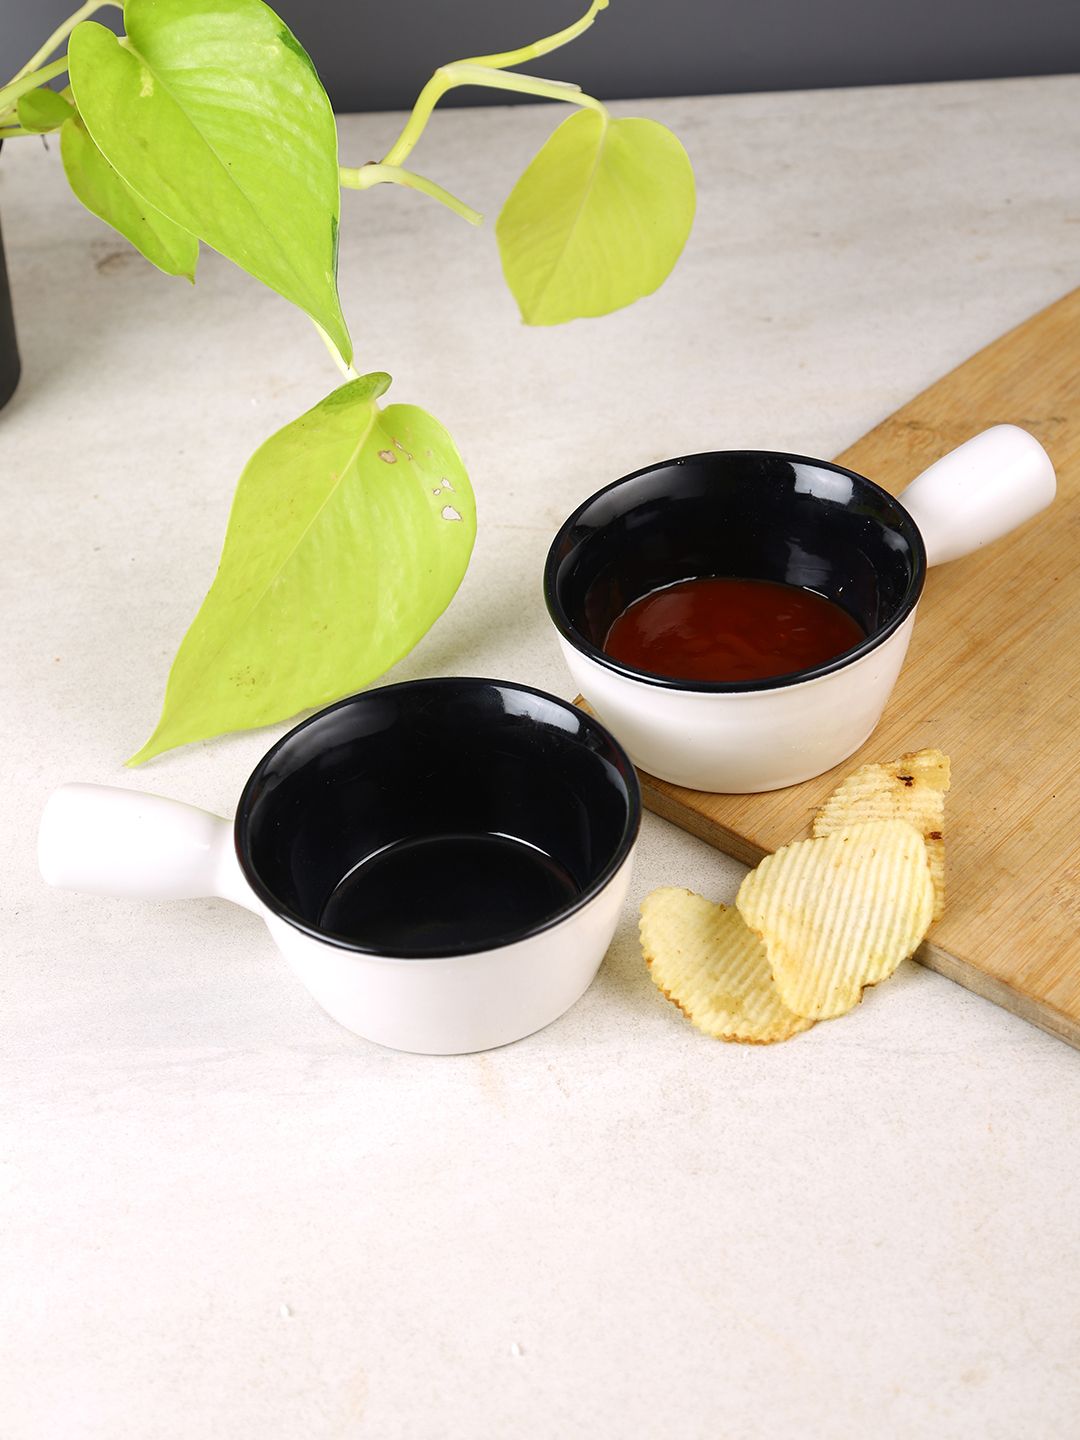 Aapno Rajasthan White & Black 2 Pieces Ceramic Glossy Bowls Price in India